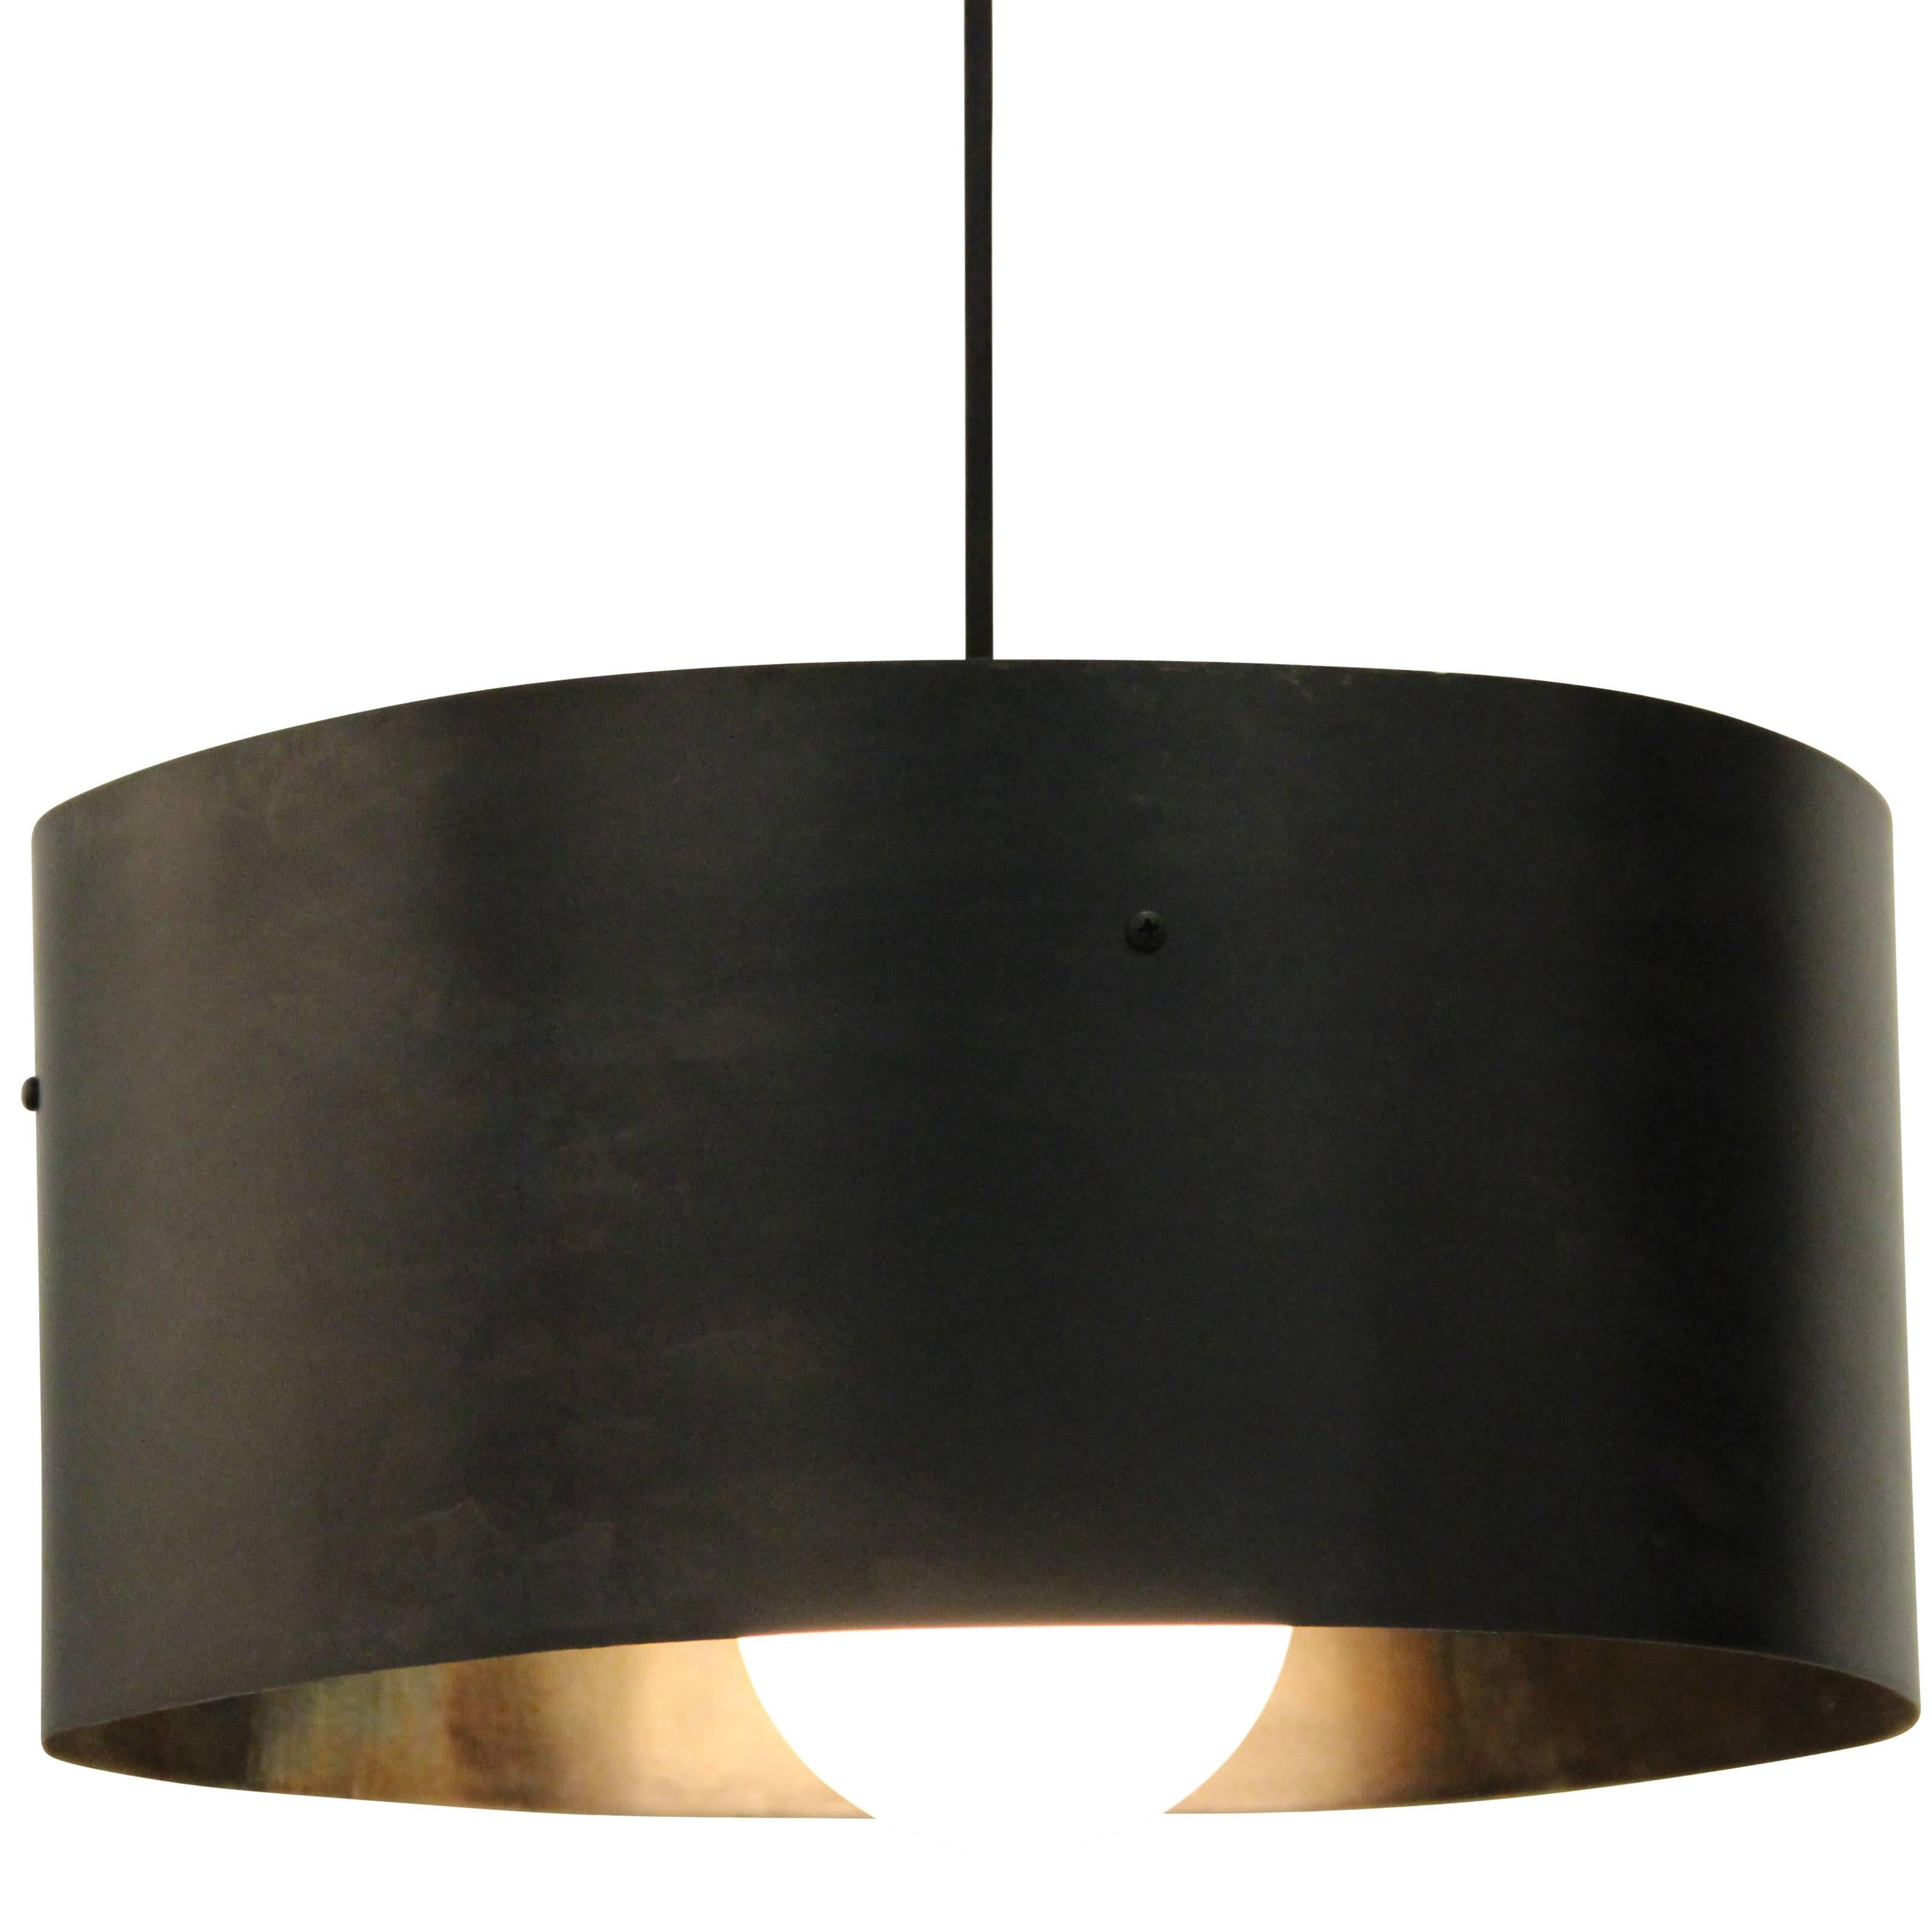 Fully Adjustable "PULLEY LIGHT" with Hand Bent Patinated Steel Shade and Dimmer